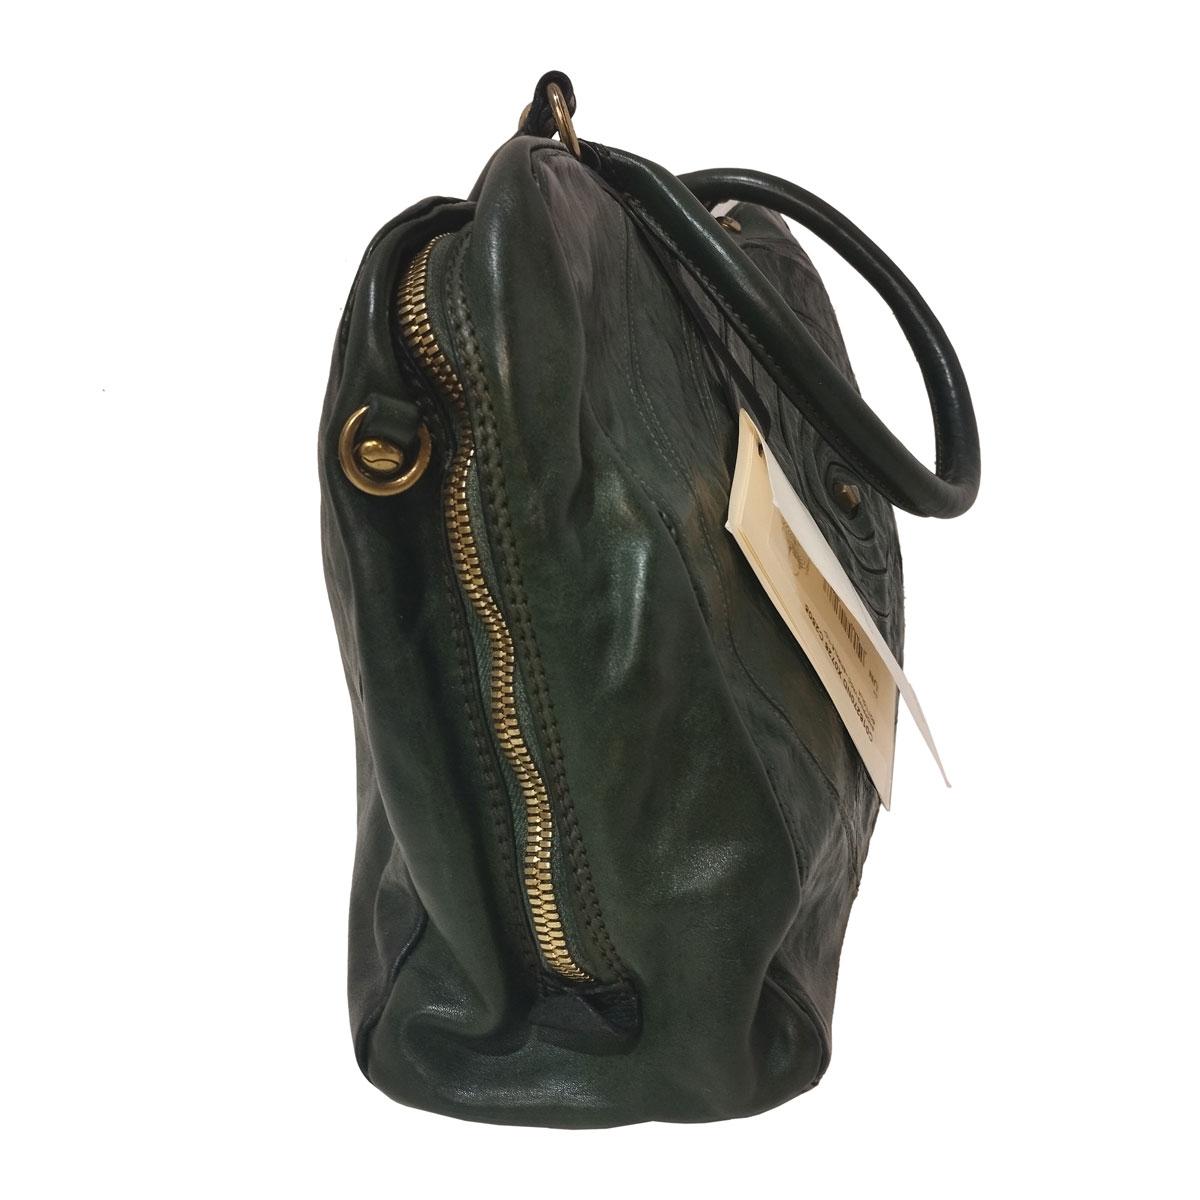 Beautiful and easy to wear italian manufactured bag
Leather bag from Campomaggi Italy
Bottle green color
Spiral pattern
Double handle
Can be carried crossbody
Zip closure
Internal zip pocket and phone holder
Cm 37 x 25 x 11 (14,5 x 9,84 x 4,33